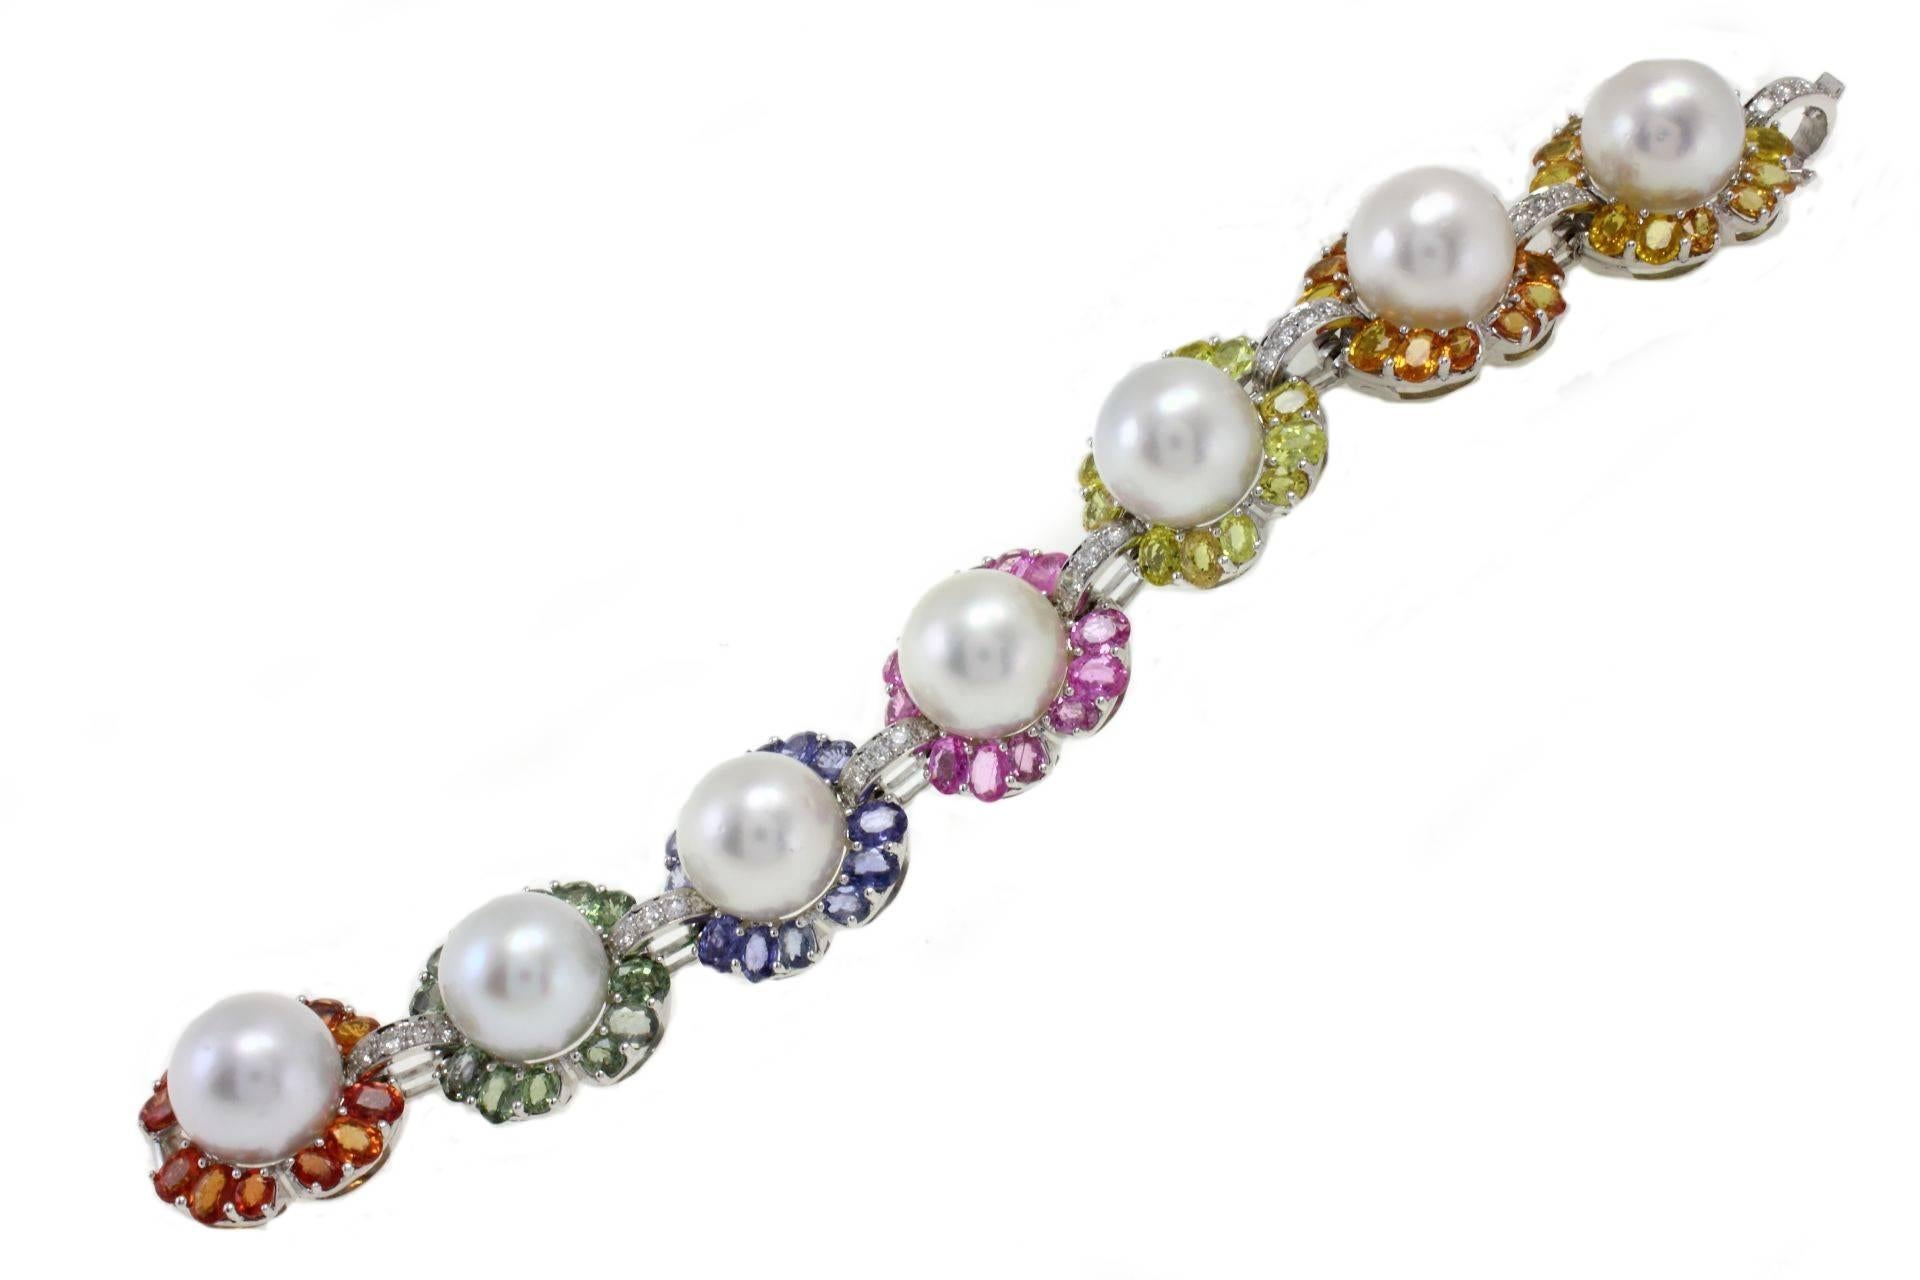 Raimbow bracelet composed of refined pearls surrounded by colored sapphires linked by white diamonds lines.

sapphires (34.21 kt)
diamonds (1.87 kt) 
pearls (29.20 gr)
Tot weight 69.80 gr

ref.gcuho